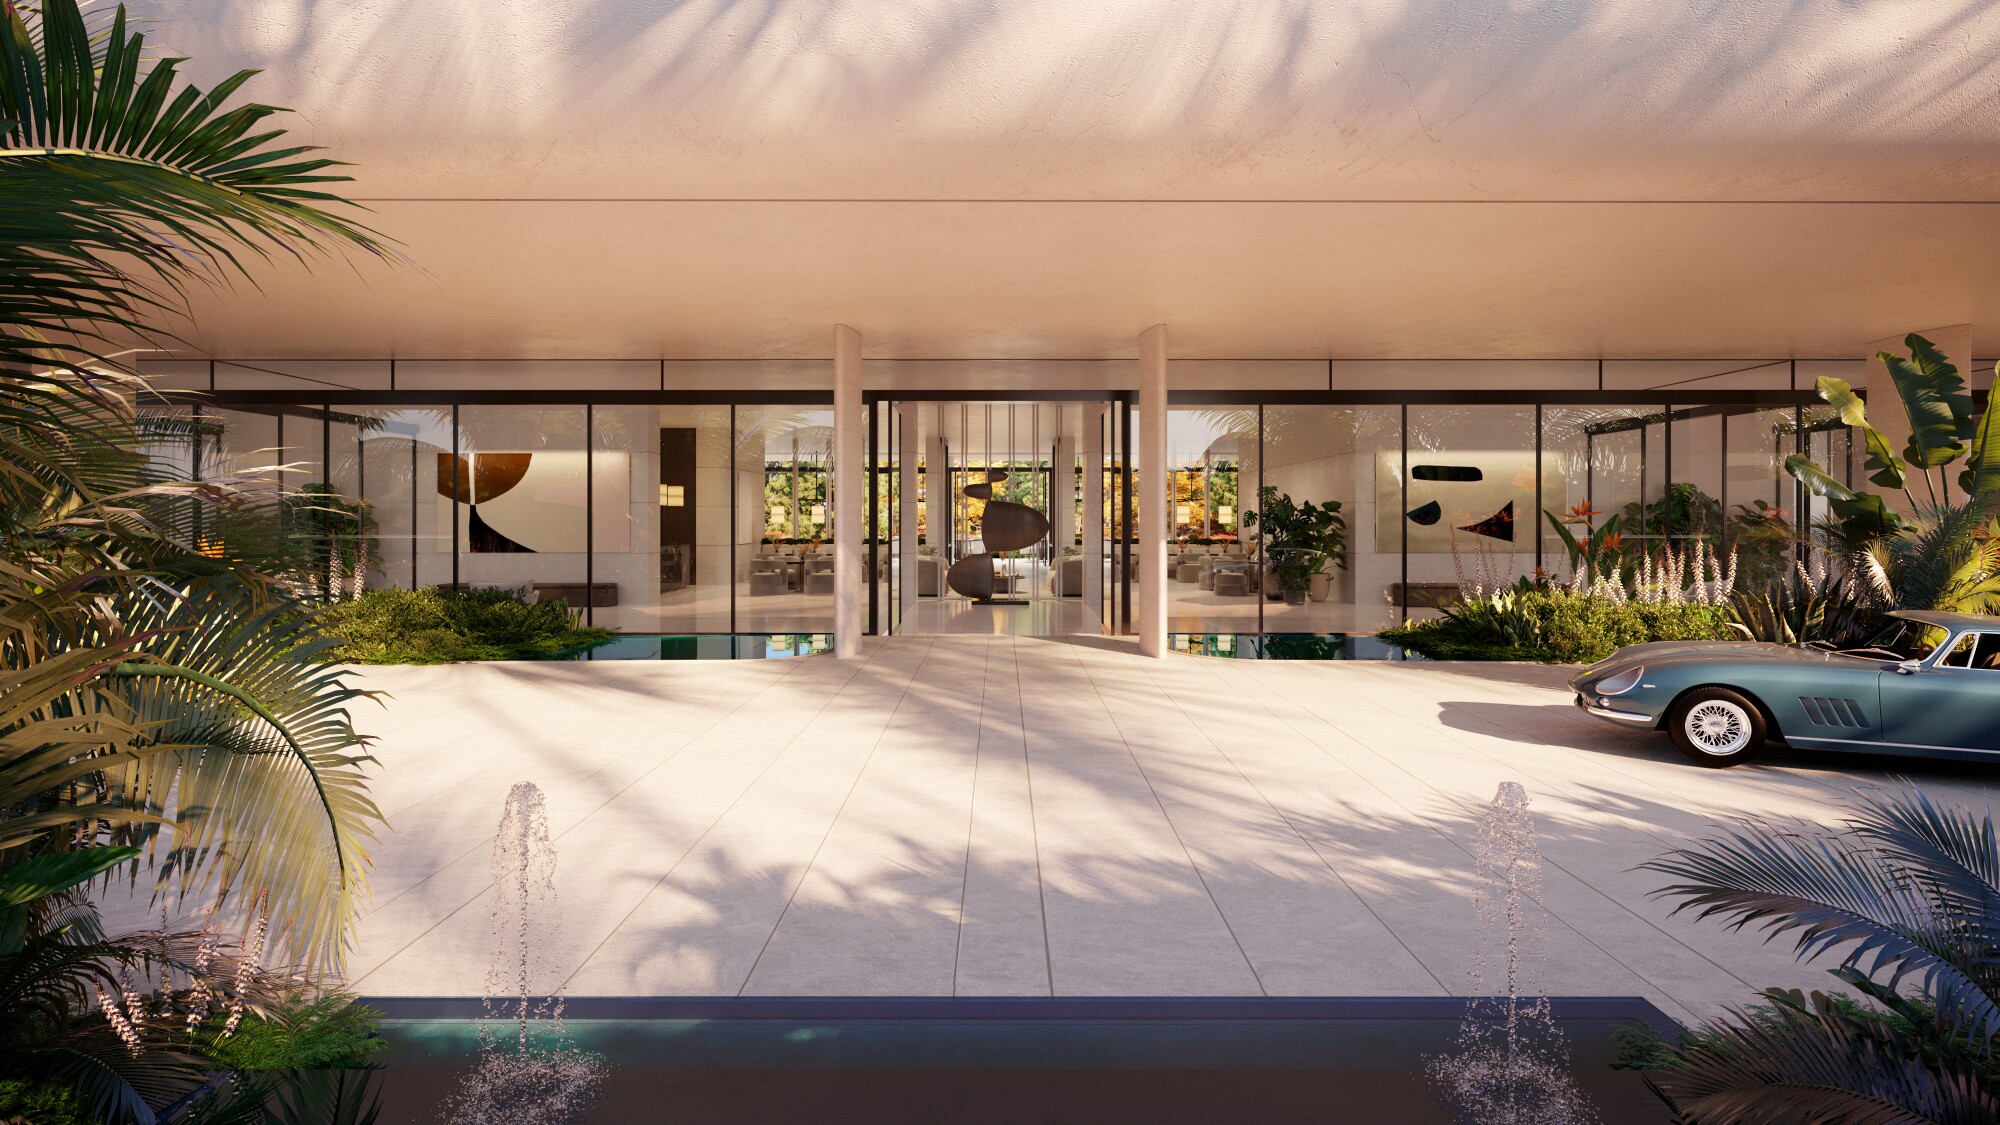 A rendering of the entrance to the Aman hotel at One Beverly Hills, which will have 42 suites.